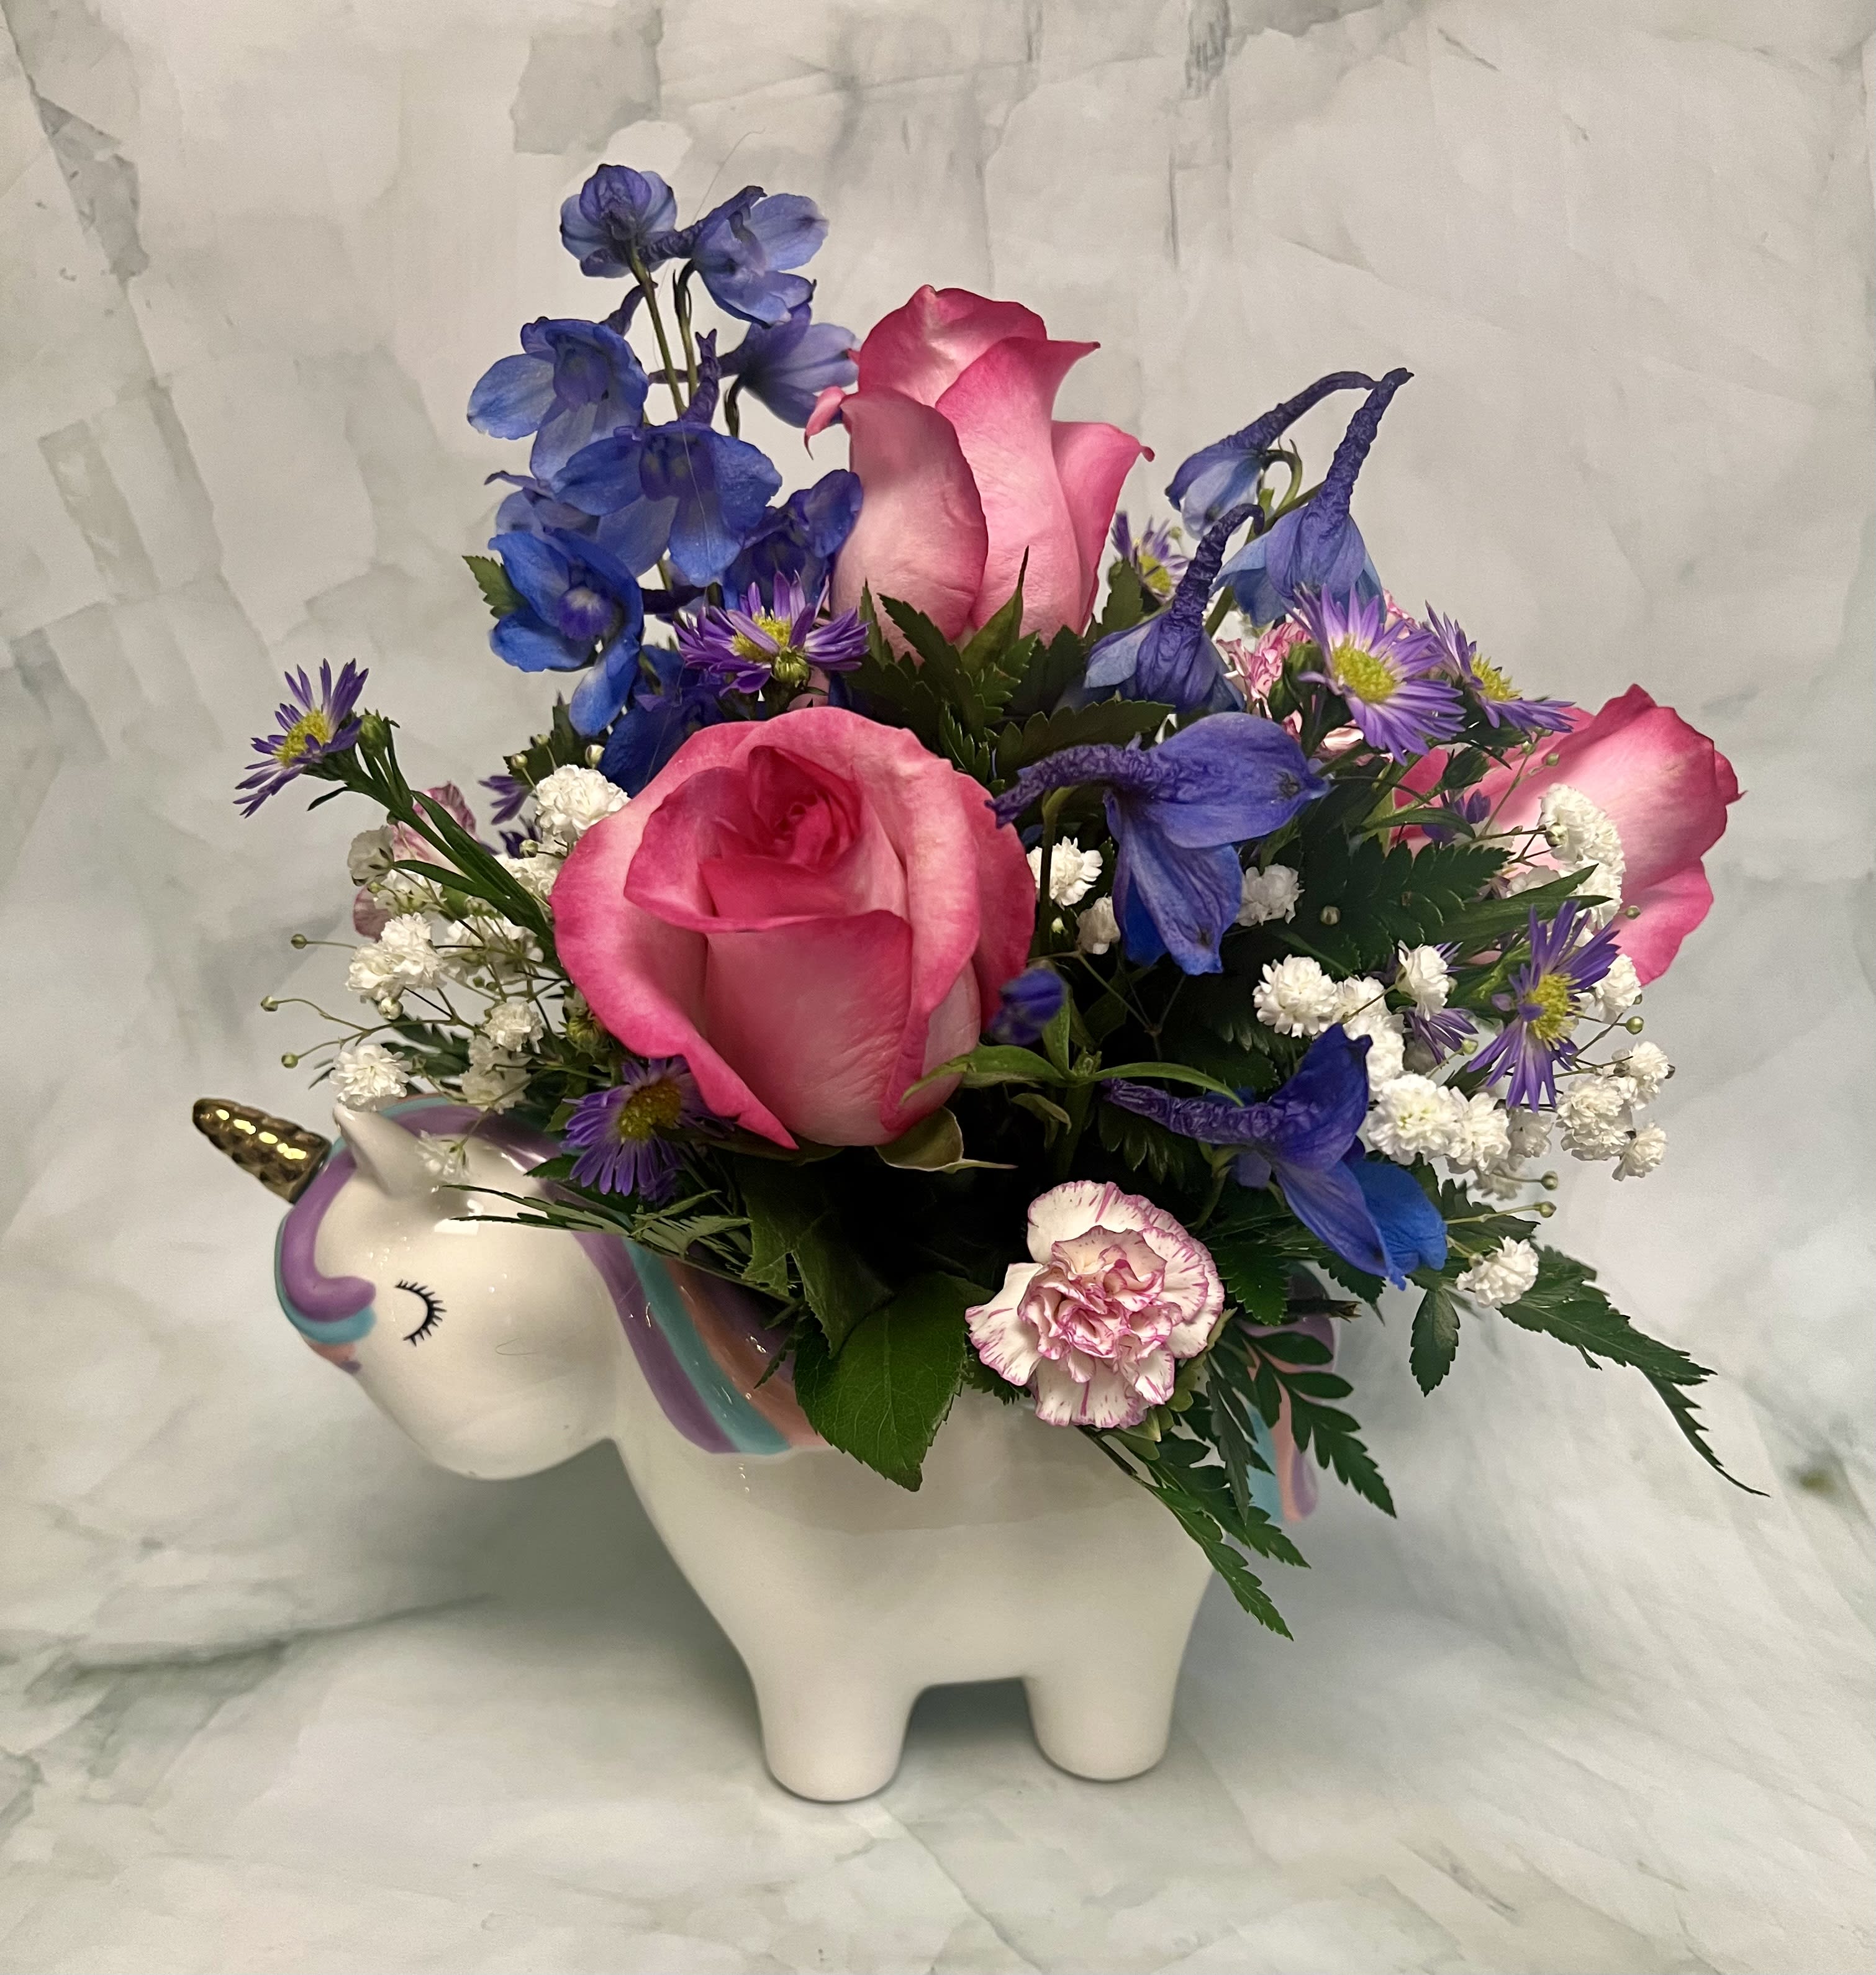 Magical Unicorn Garden  - This magical arrangement is made is this gorgeous unicorn planter that makes the perfect keepsake. The flowers used are Roses, Delphinium, Babies Breath, Aster and Carnations.